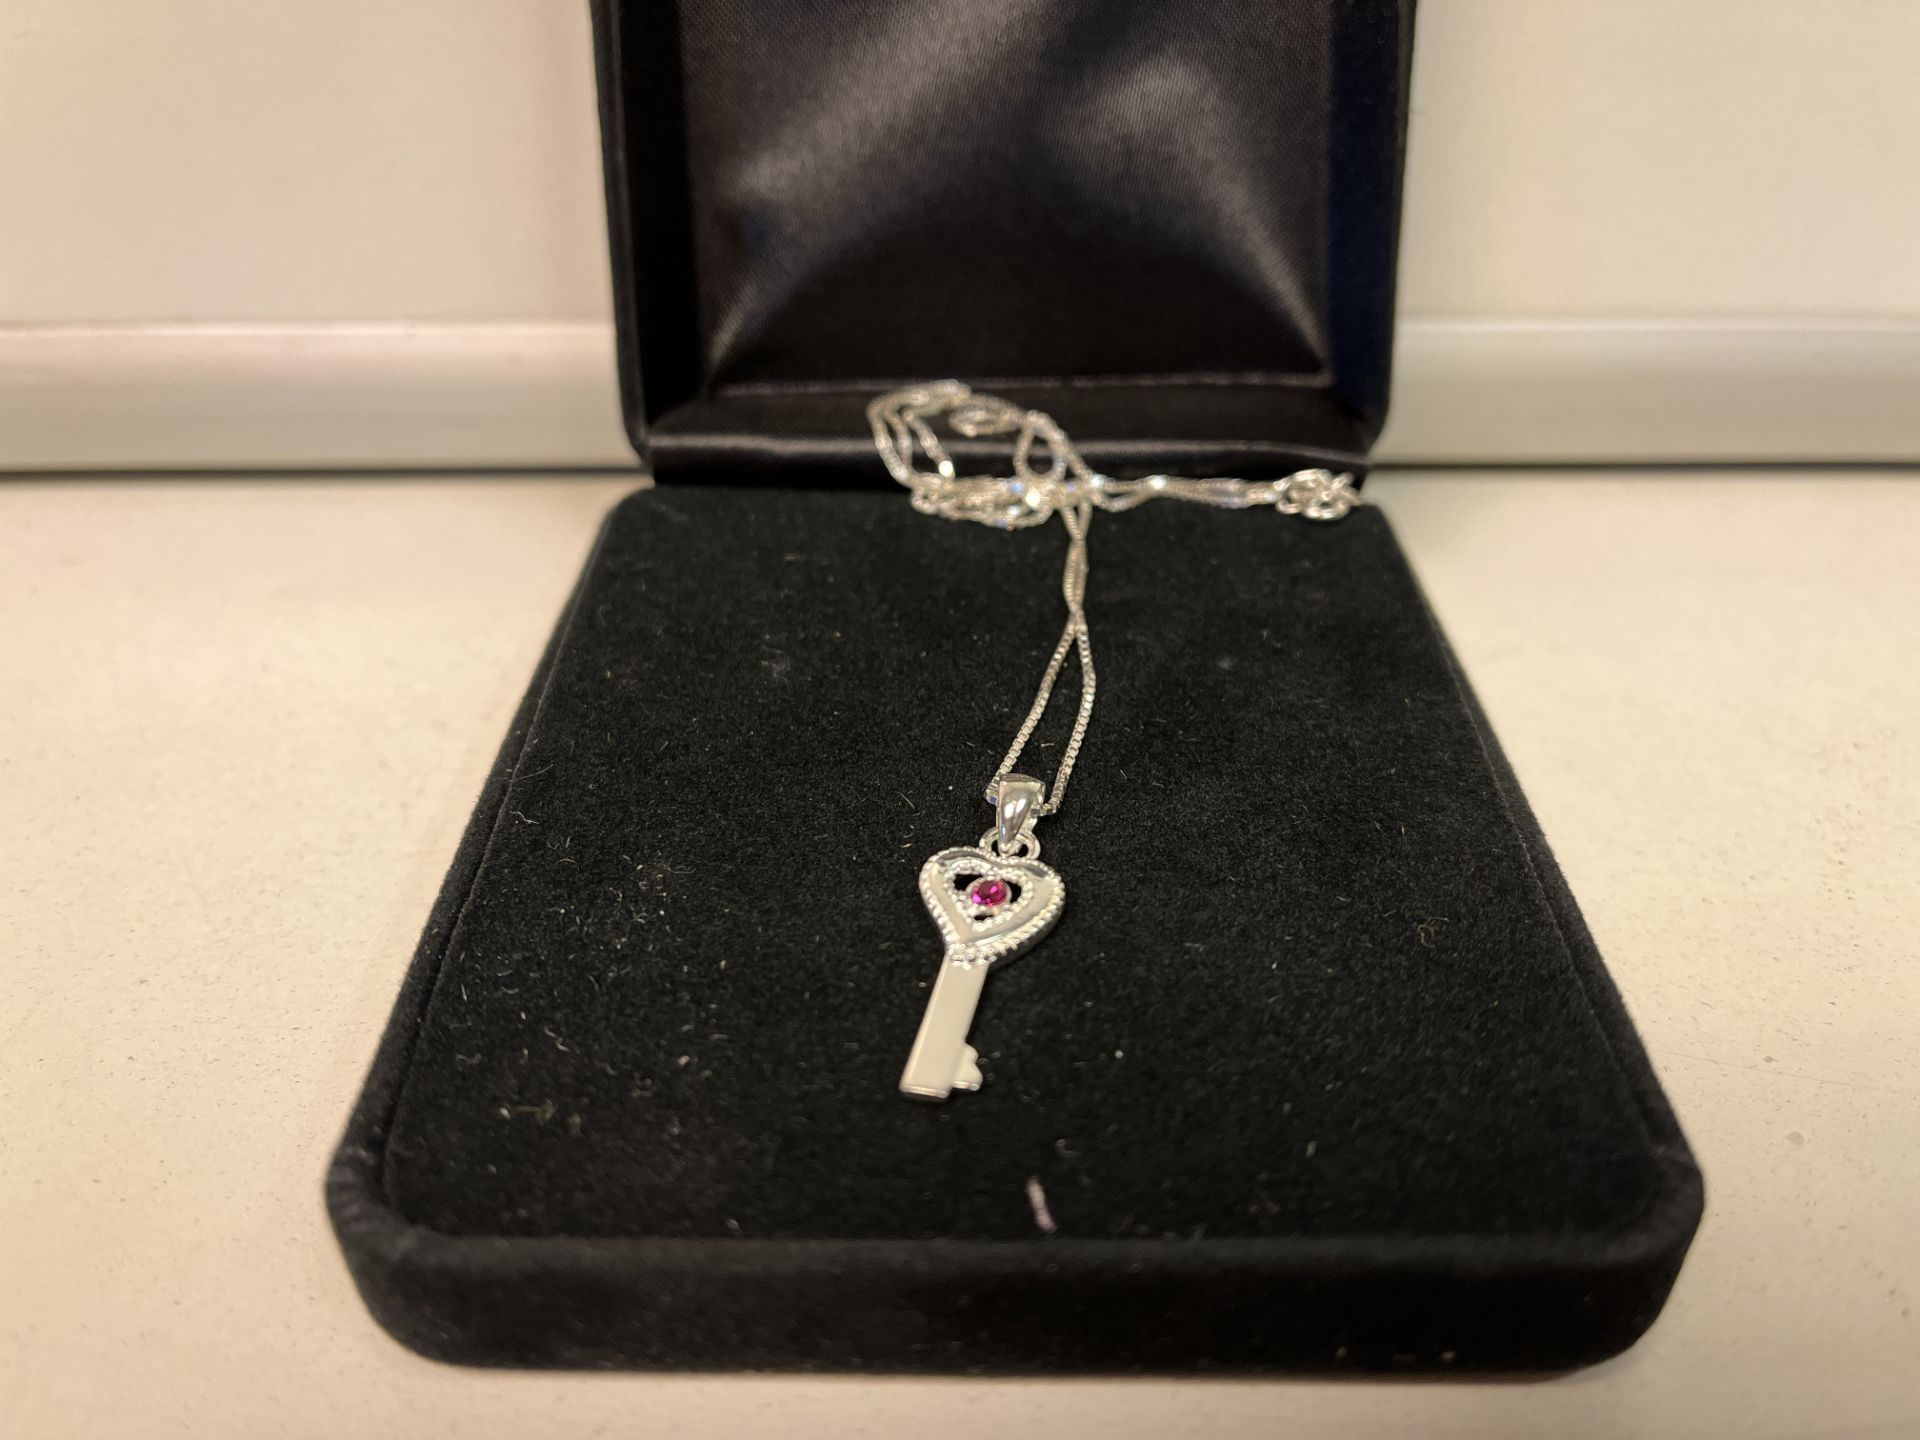 40 x NEW GIFT BOXED - GIANI JEWELLERY STERLING SILVER NECKLACE AND KEY PENDANT WITH PURPLE GEMSTONE.